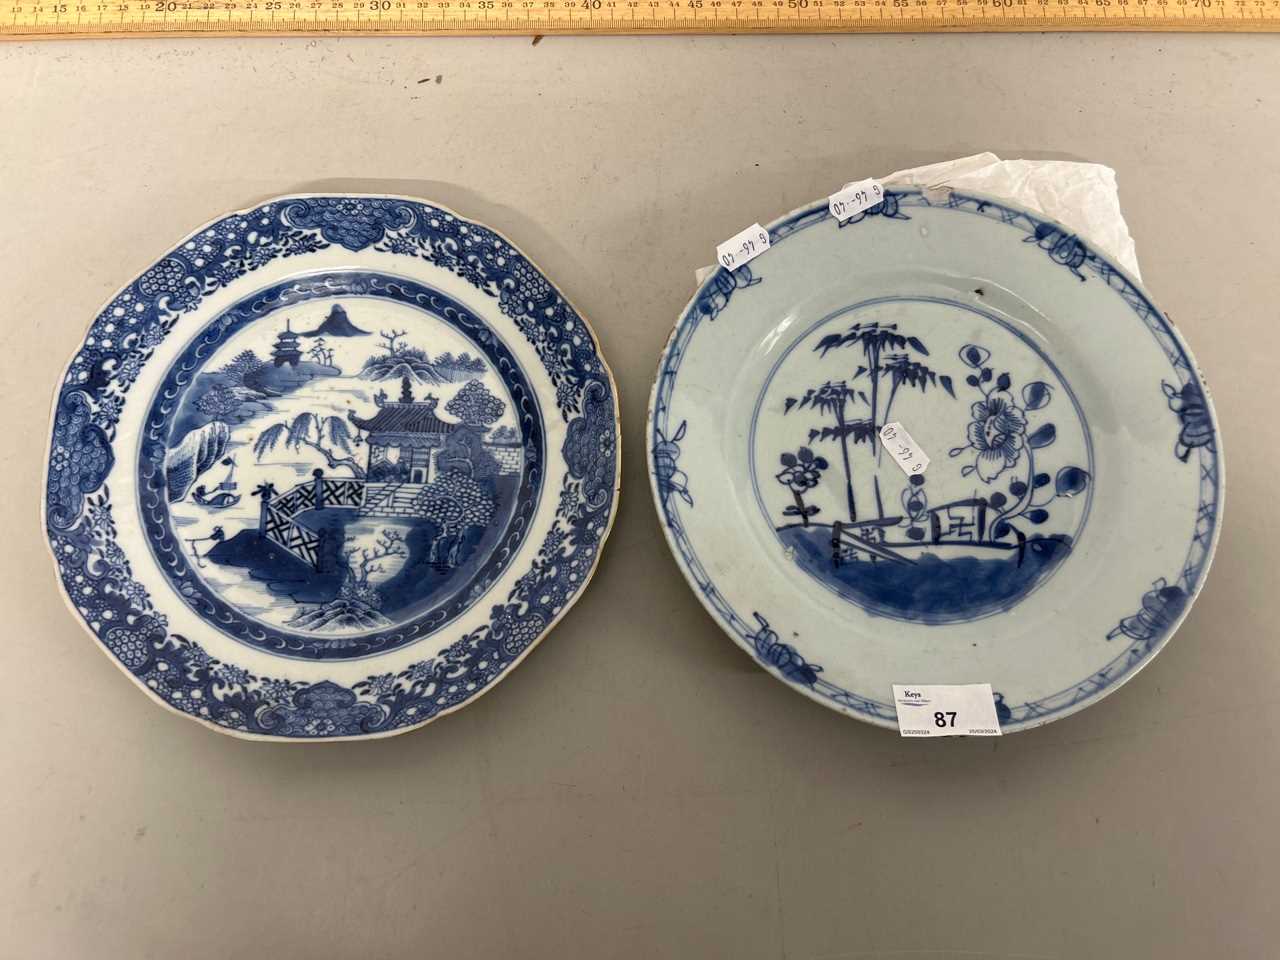 Two Chinese porcelain plates